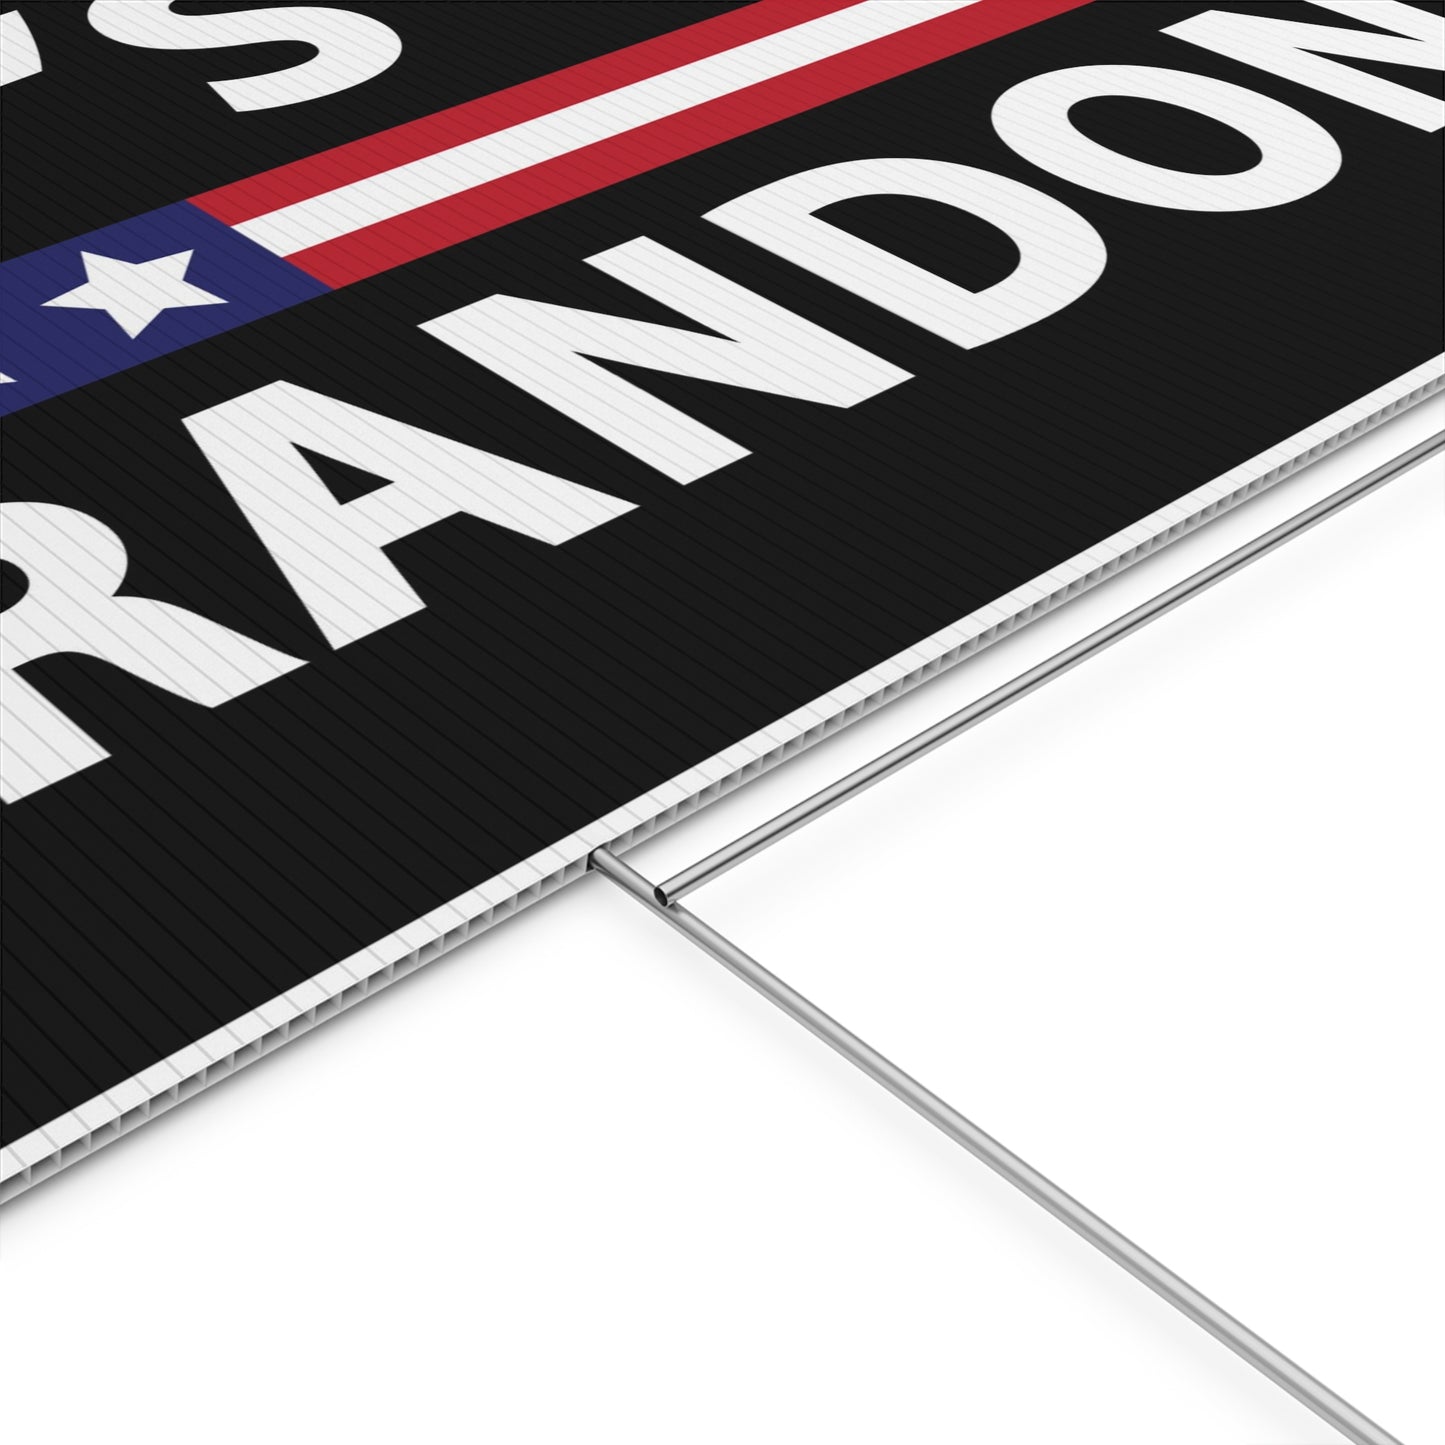 Let's Go Brandon, Yard Sign, Printed 2-Sided 18x12, 24x18 or 36x24, Metal H-Stake Included, v4